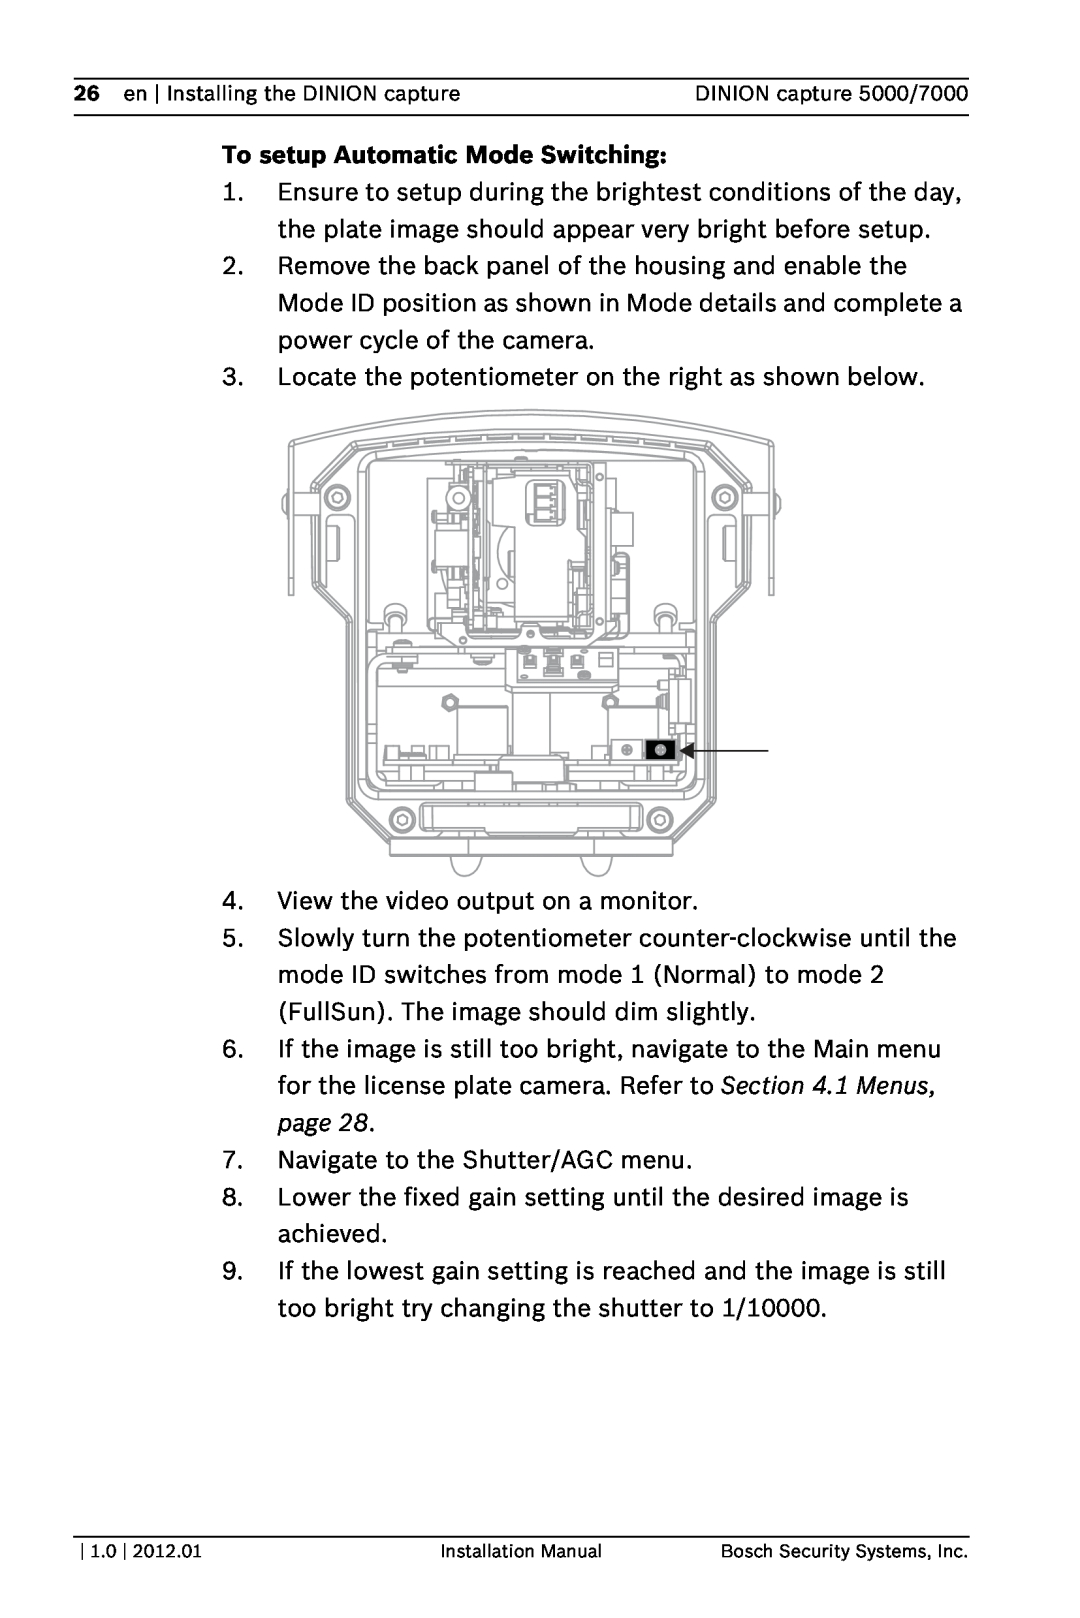 Bosch Appliances 5000, 7000 installation manual To setup Automatic Mode Switching 